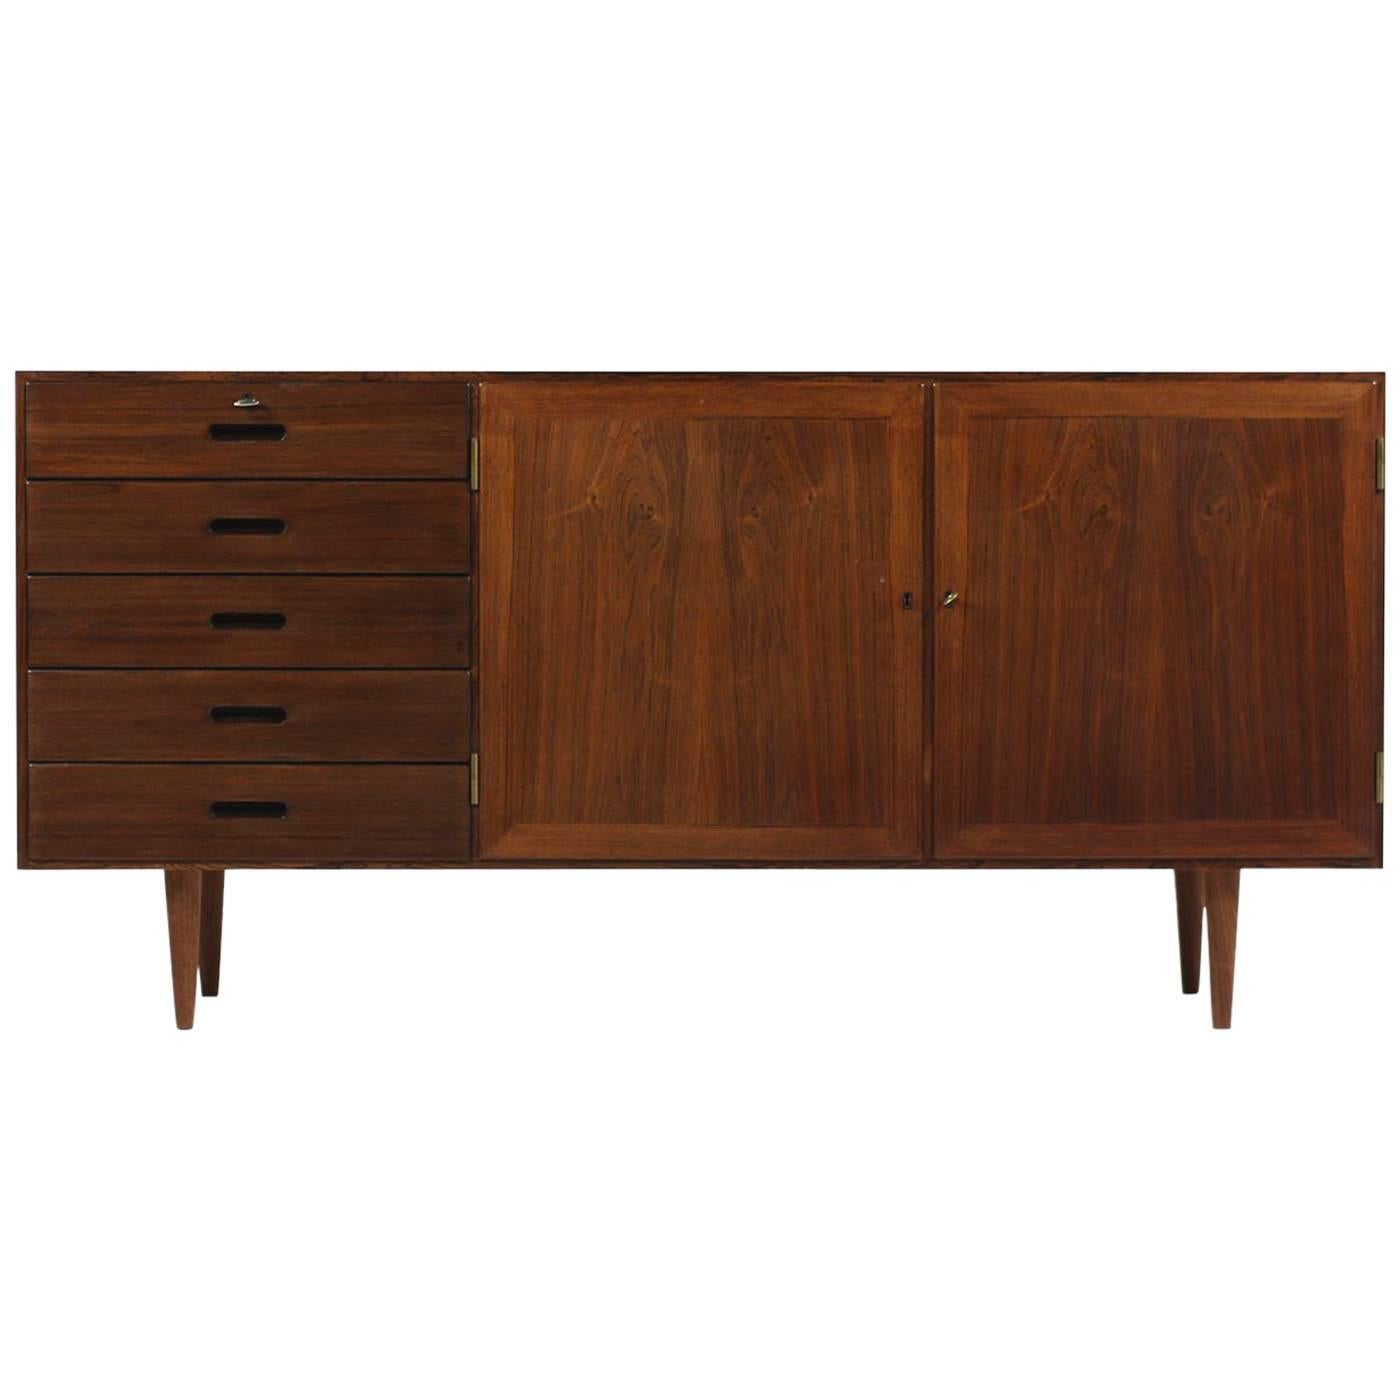 Exclusive 1960s Kai Winding Rosewood Sideboard with Drawers Poul Jeppesen Brass For Sale